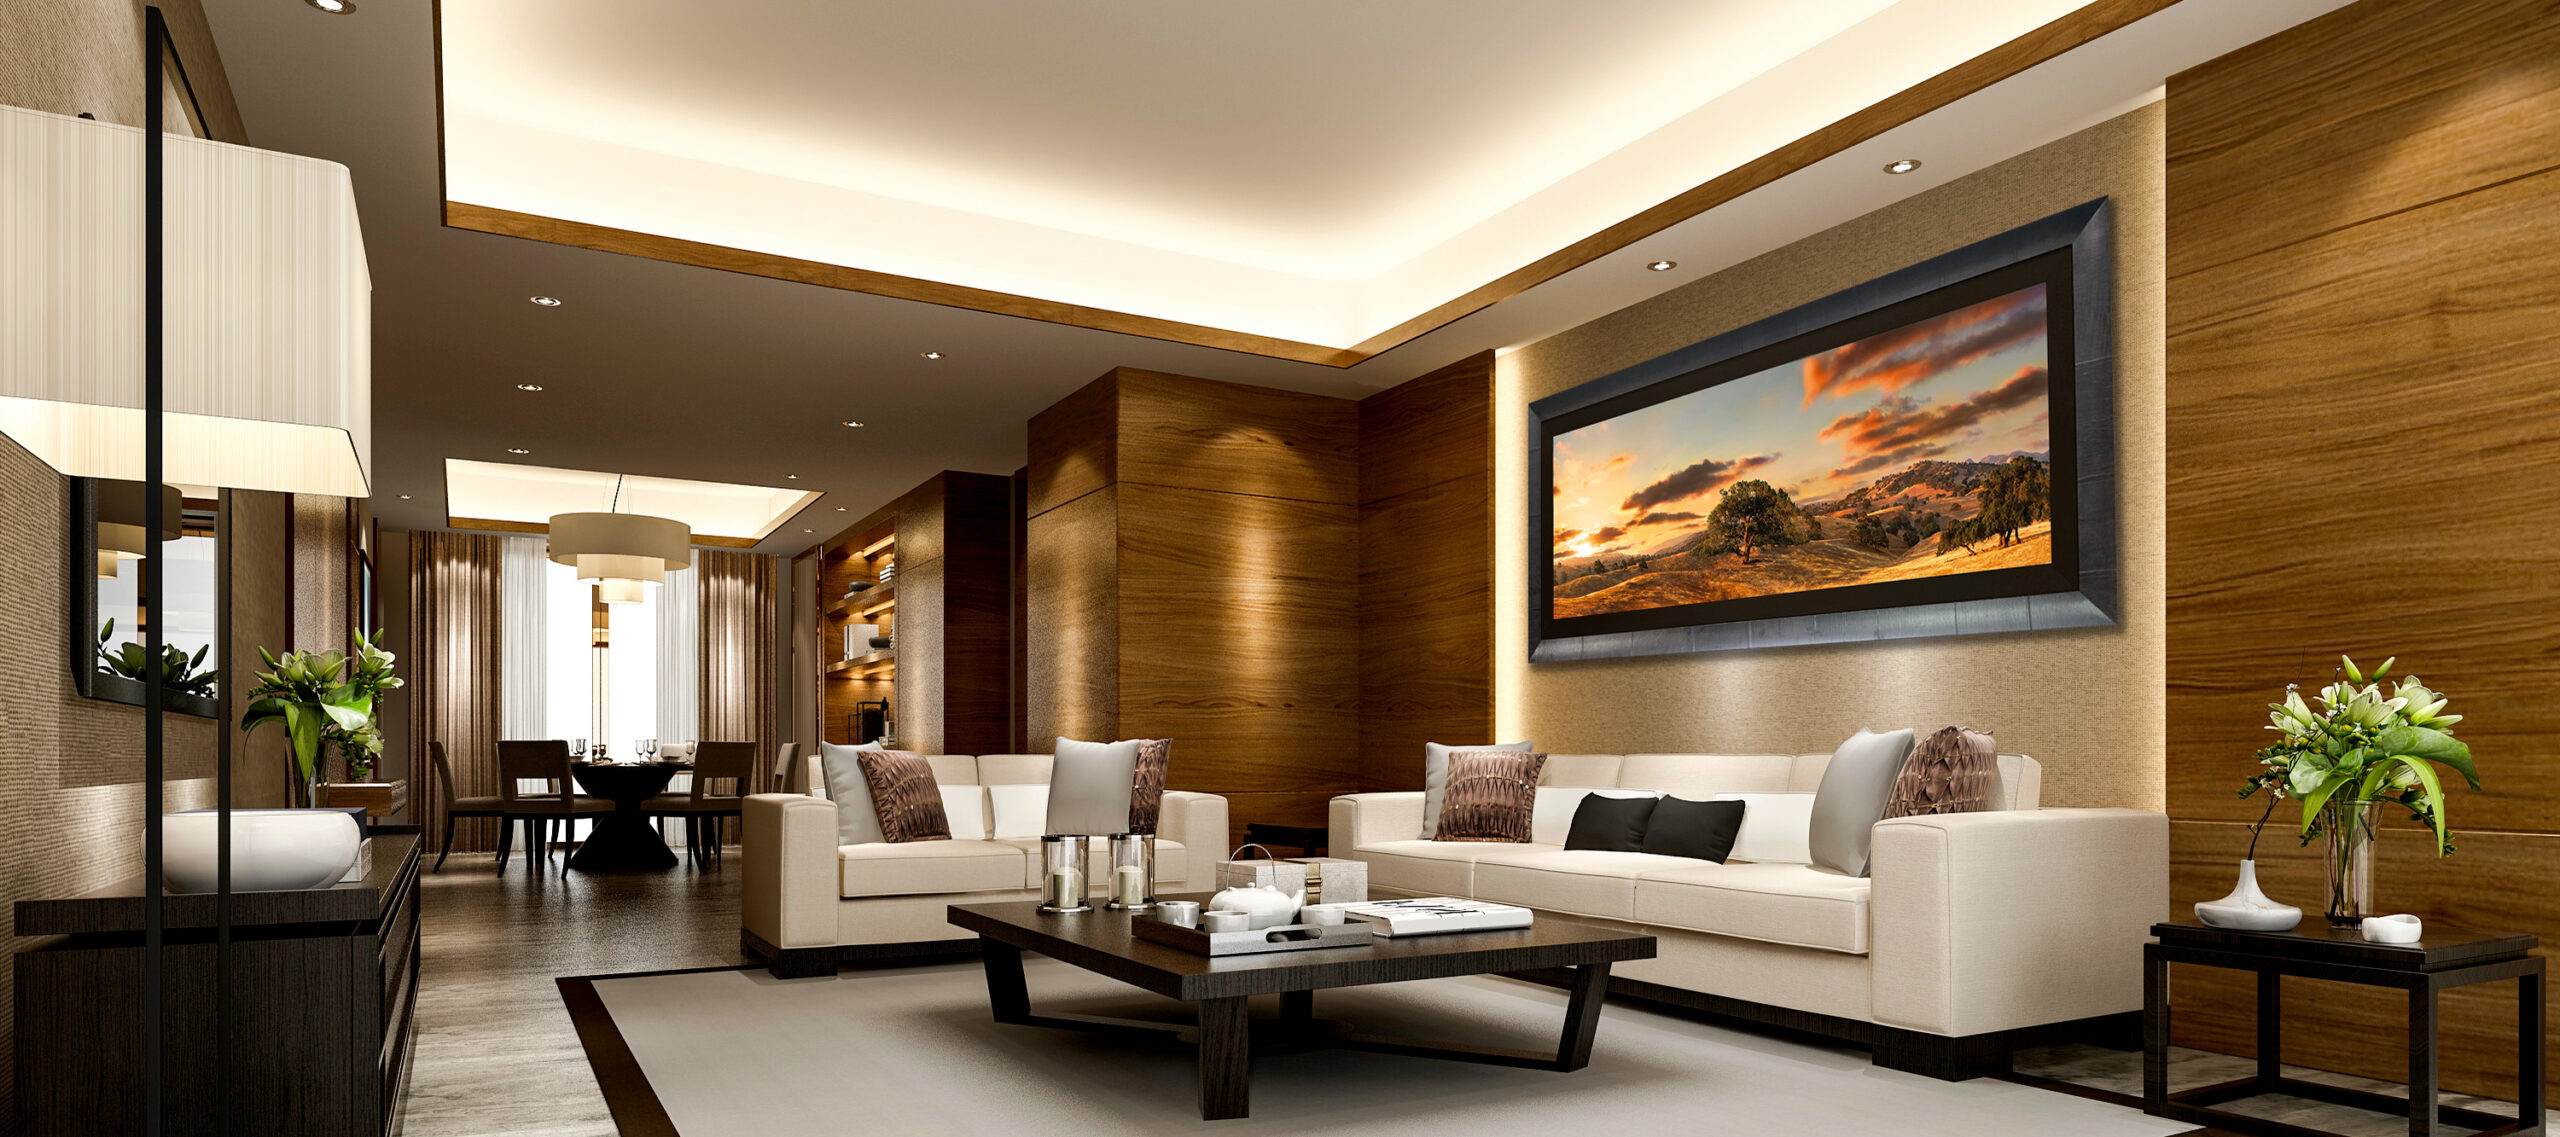 3d,Rendering,Modern,Dining,Room,And,Living,Room,With,Luxury